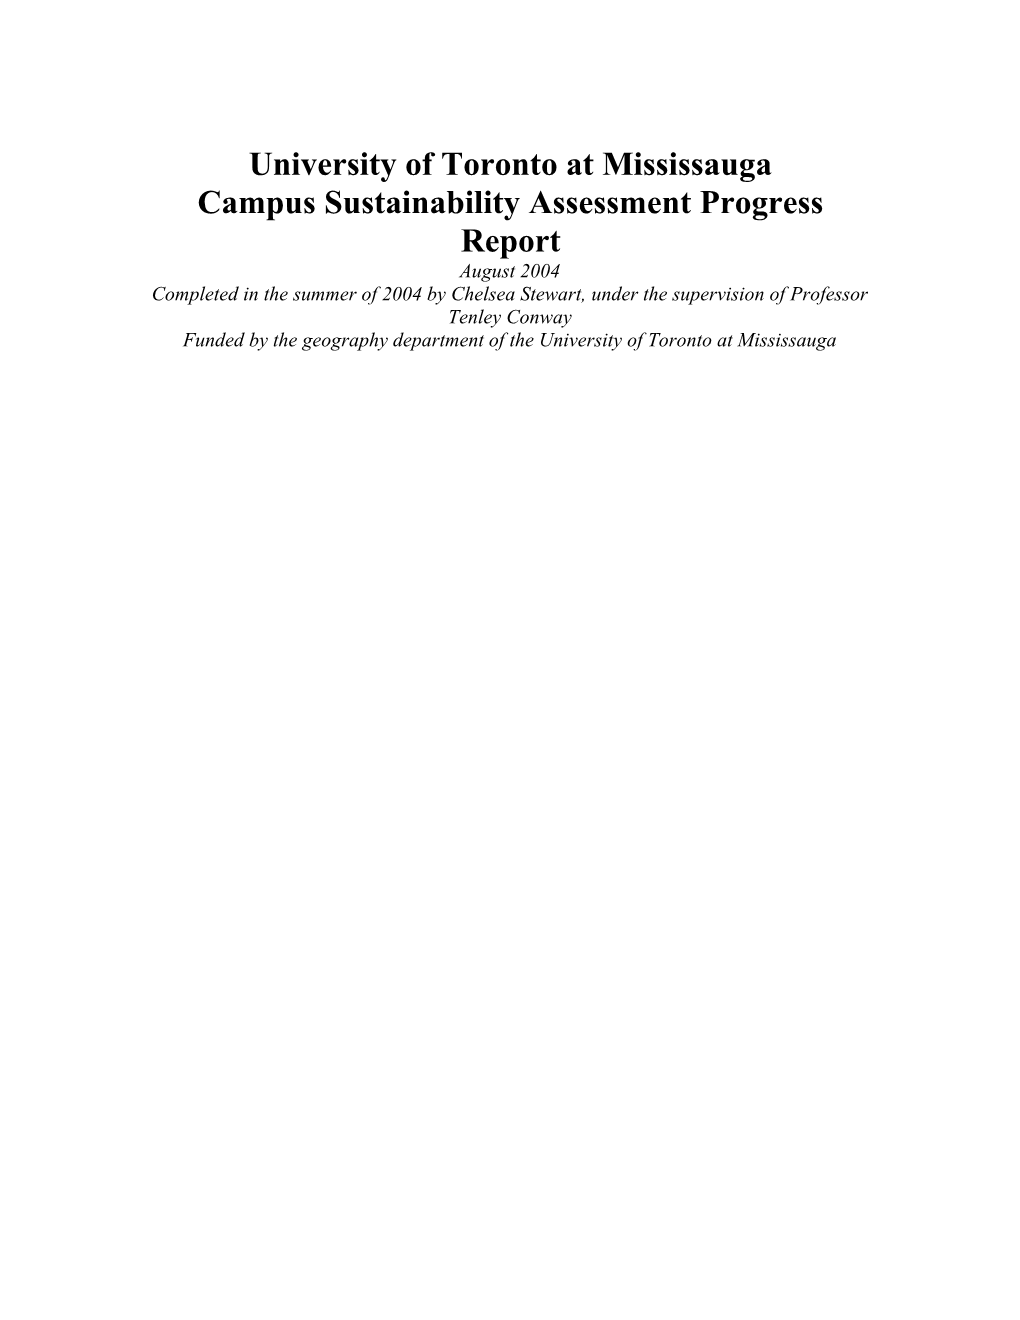 Recommendations for Future Sustainability Assessments at UTM